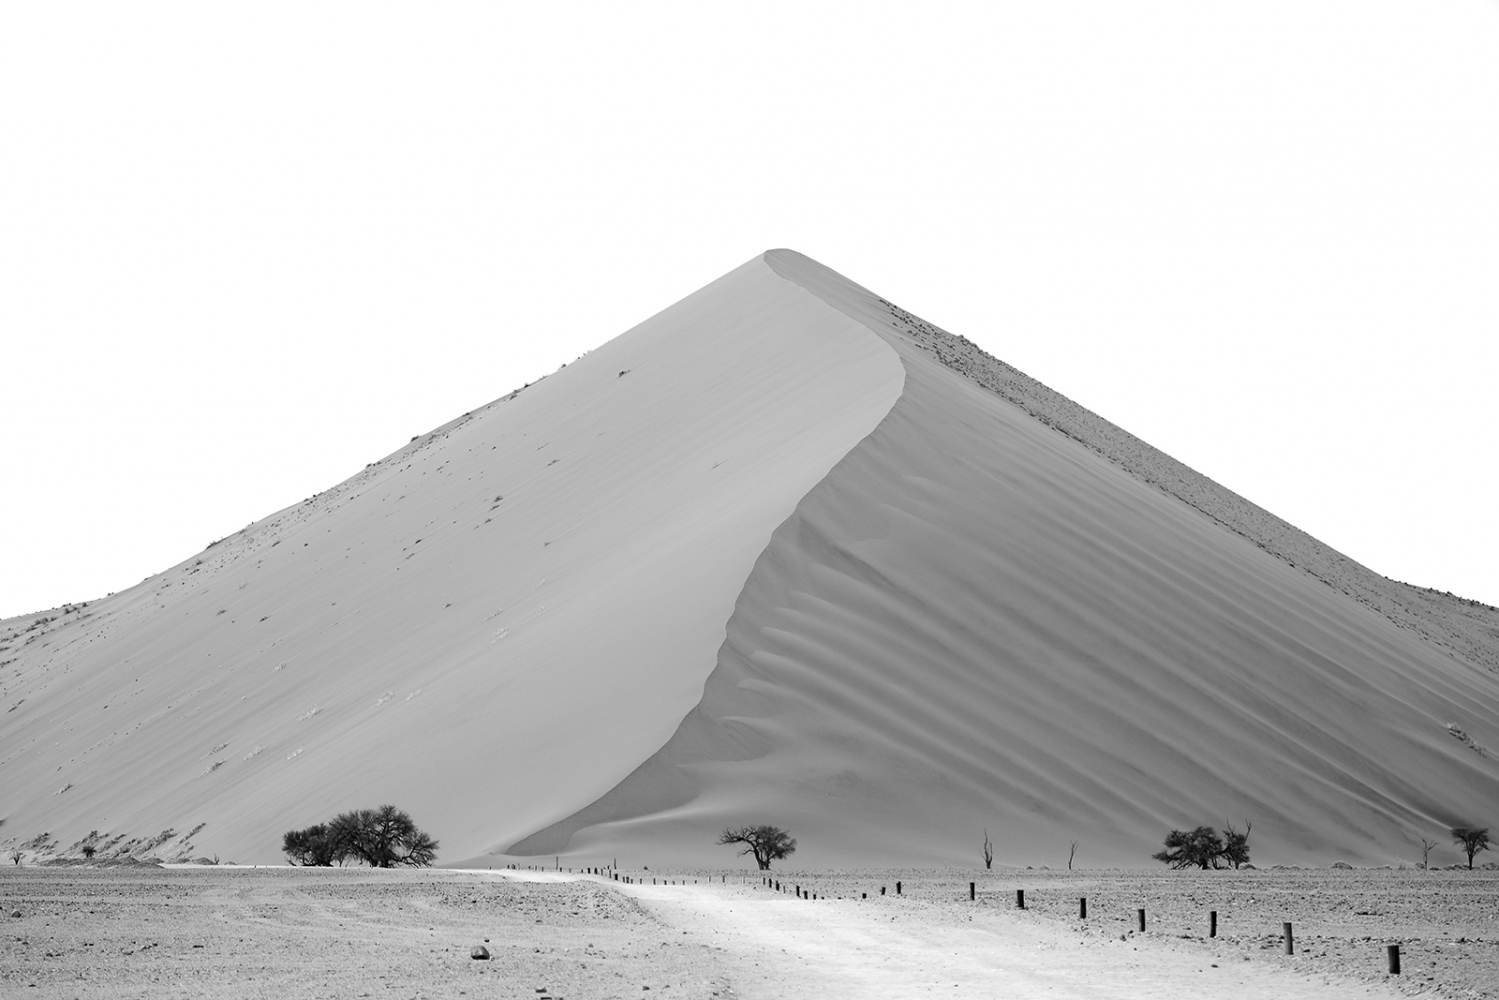 Image from Dunes. The surreal landscape